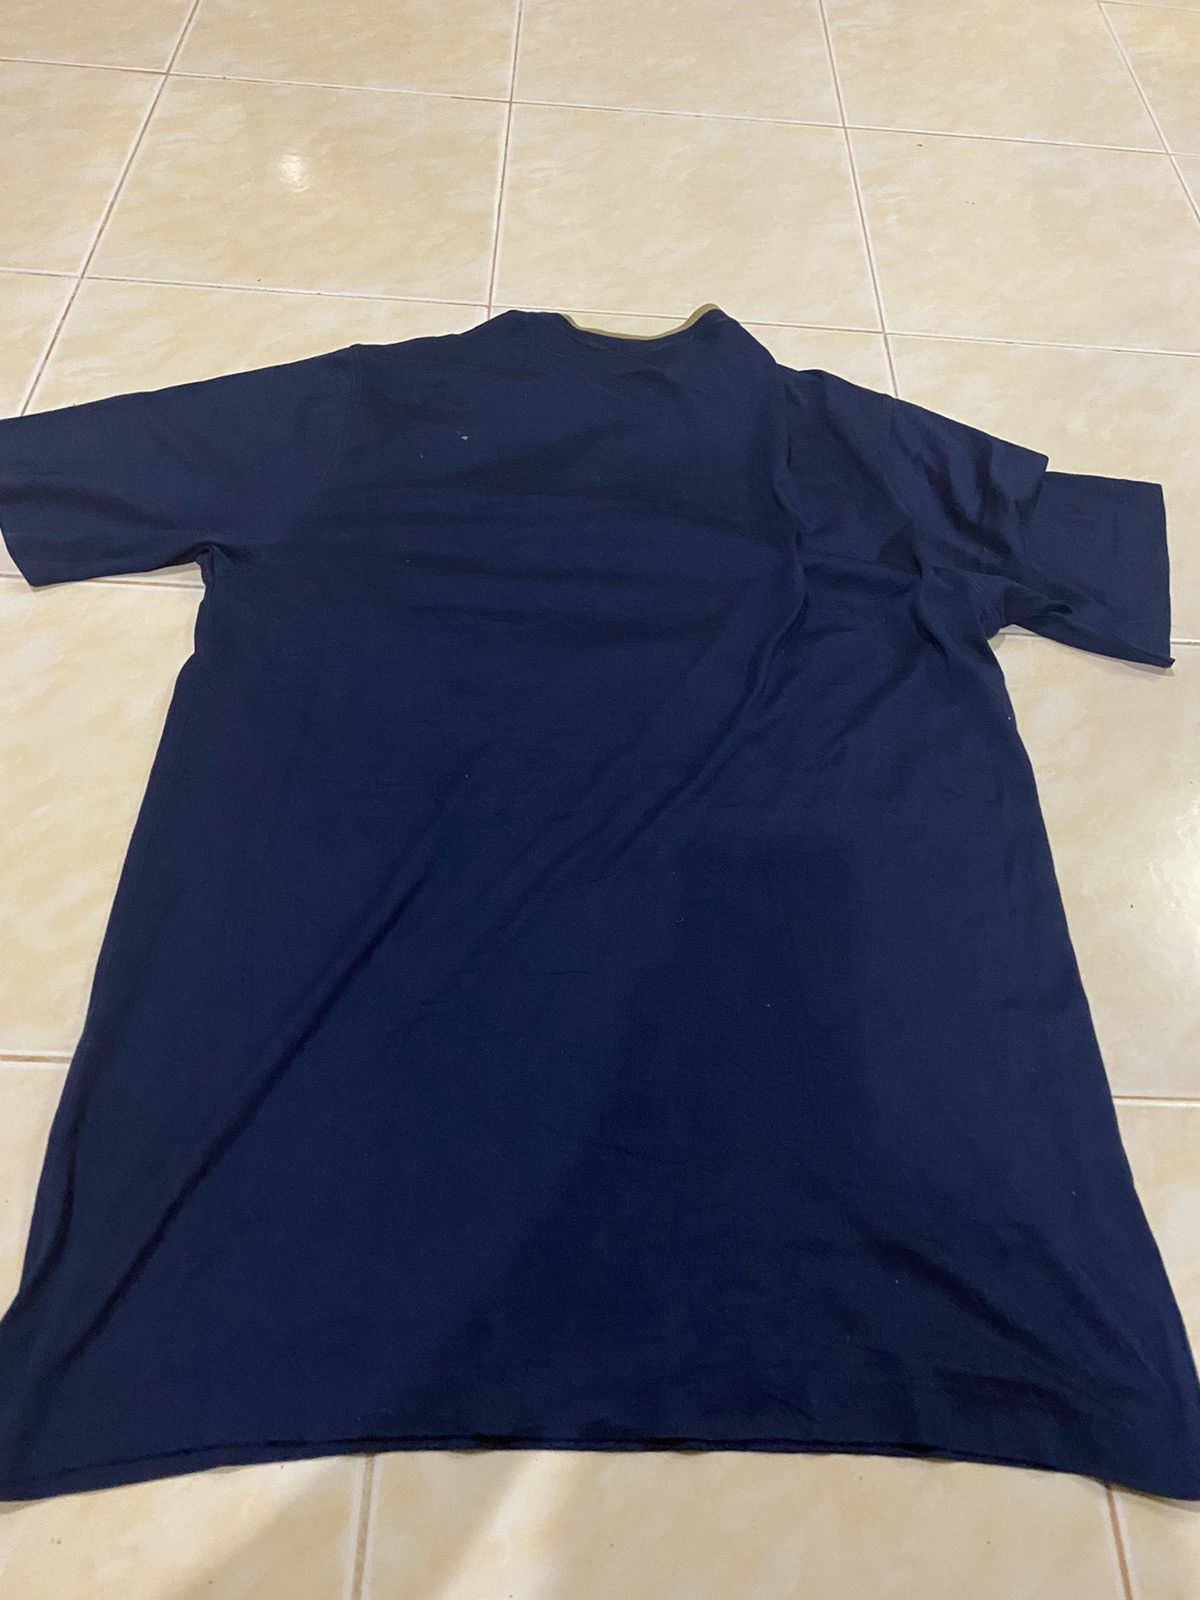 Authentic Longchamp Embroidered Tee - 2